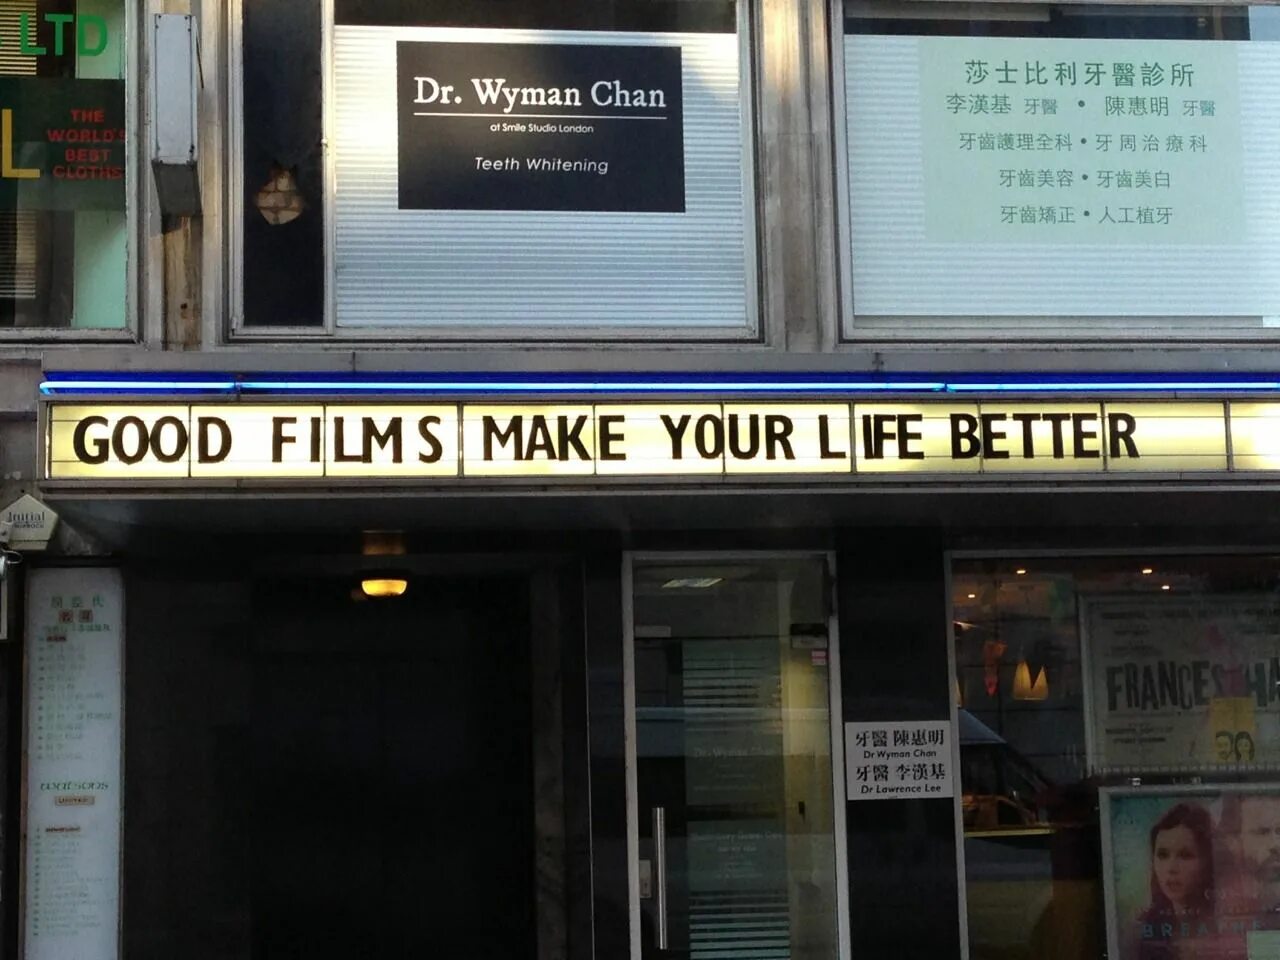 The good life found. Good films. Good Life Inc. Life is better. Life good be Dream.